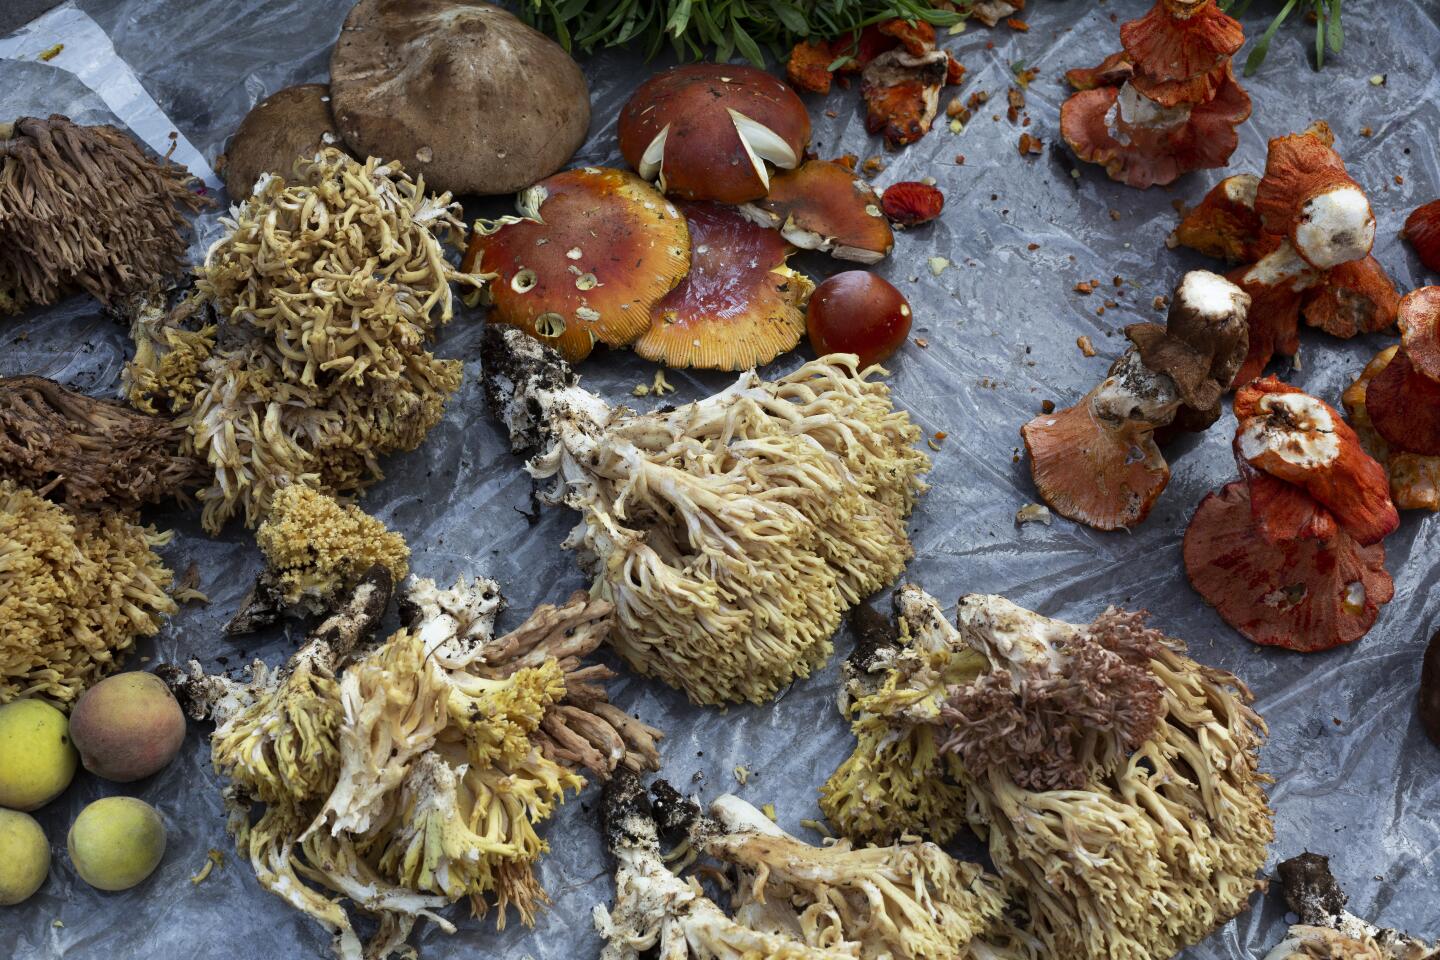 A wide variety of seasonal wild mushrooms are available for sale in Cheran’s markets from June to October. The season begins with “yuntas”, or yokes, and ends with bright orange “trompas de puerco”, or trumpet mushrooms.